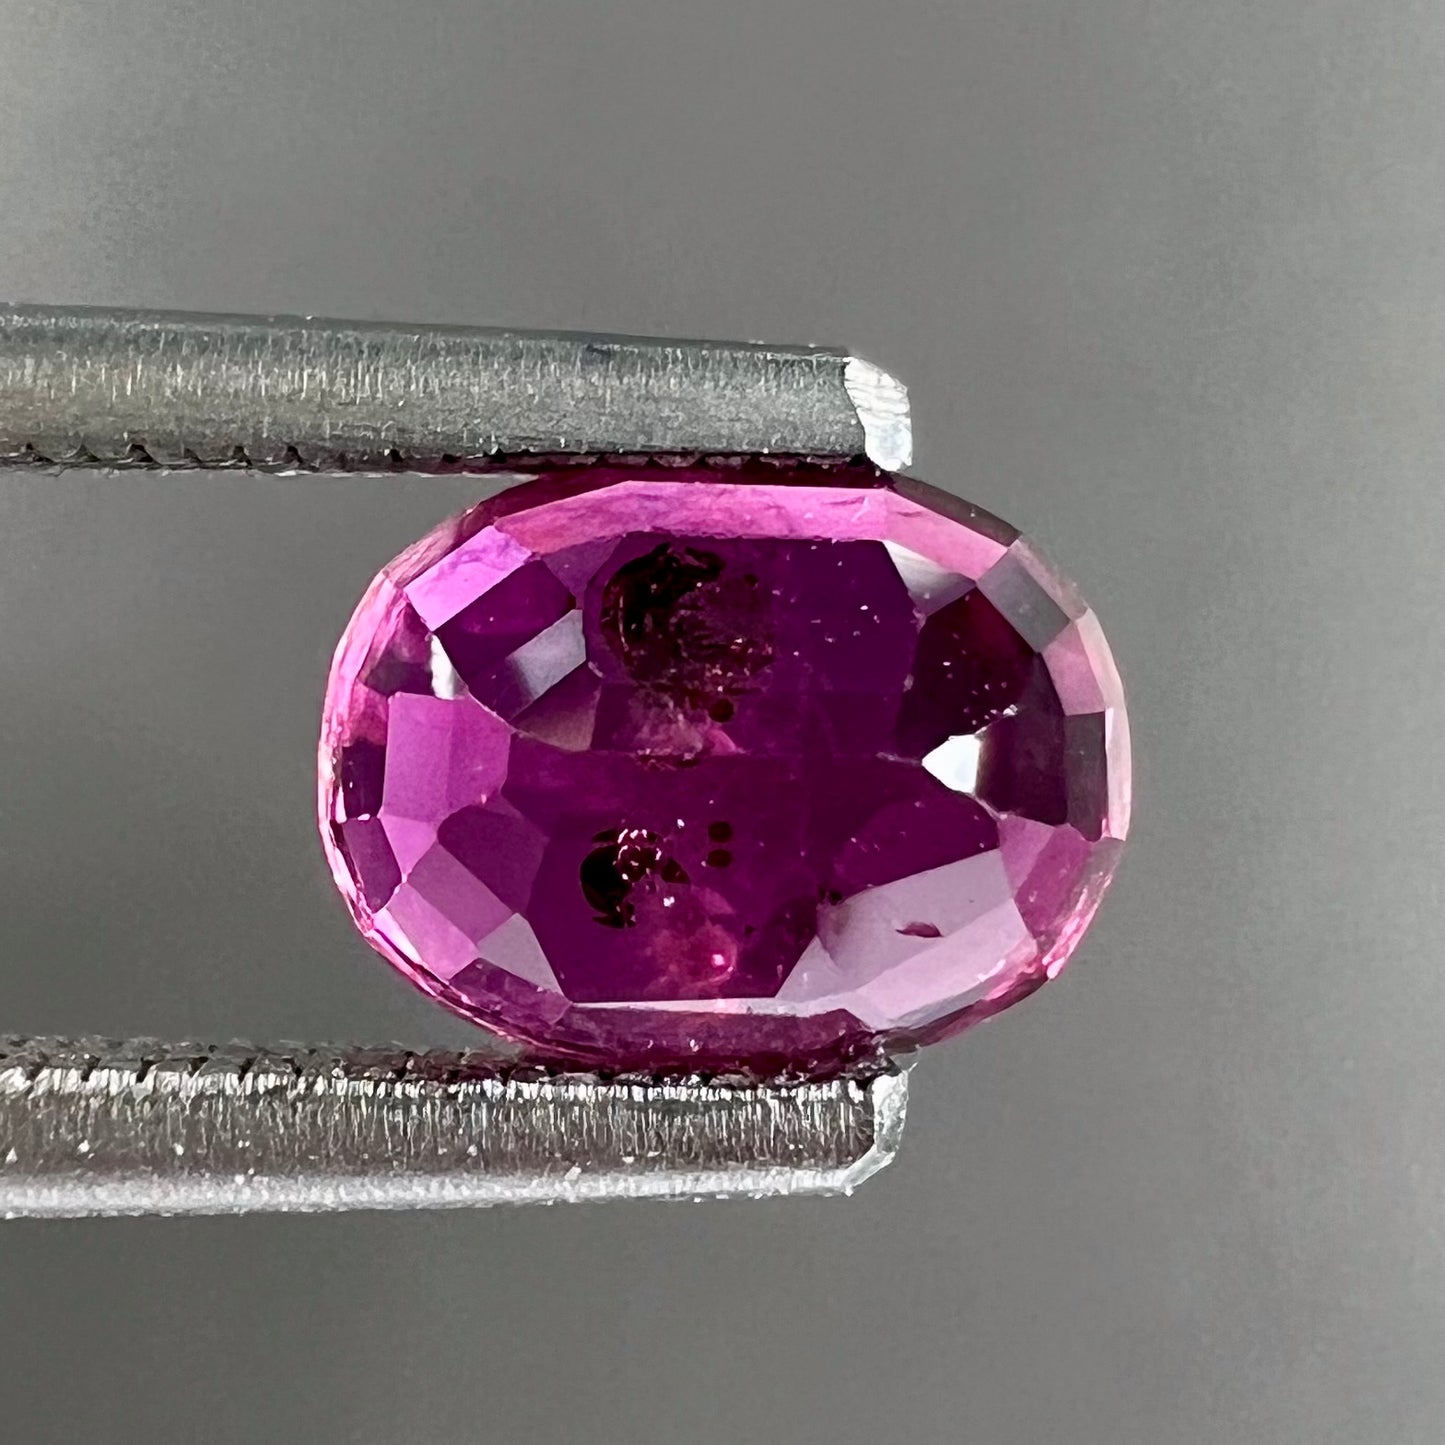 A loose, faceted oval cut natural purple sapphire.  The stone has a burst crystal inclusion.